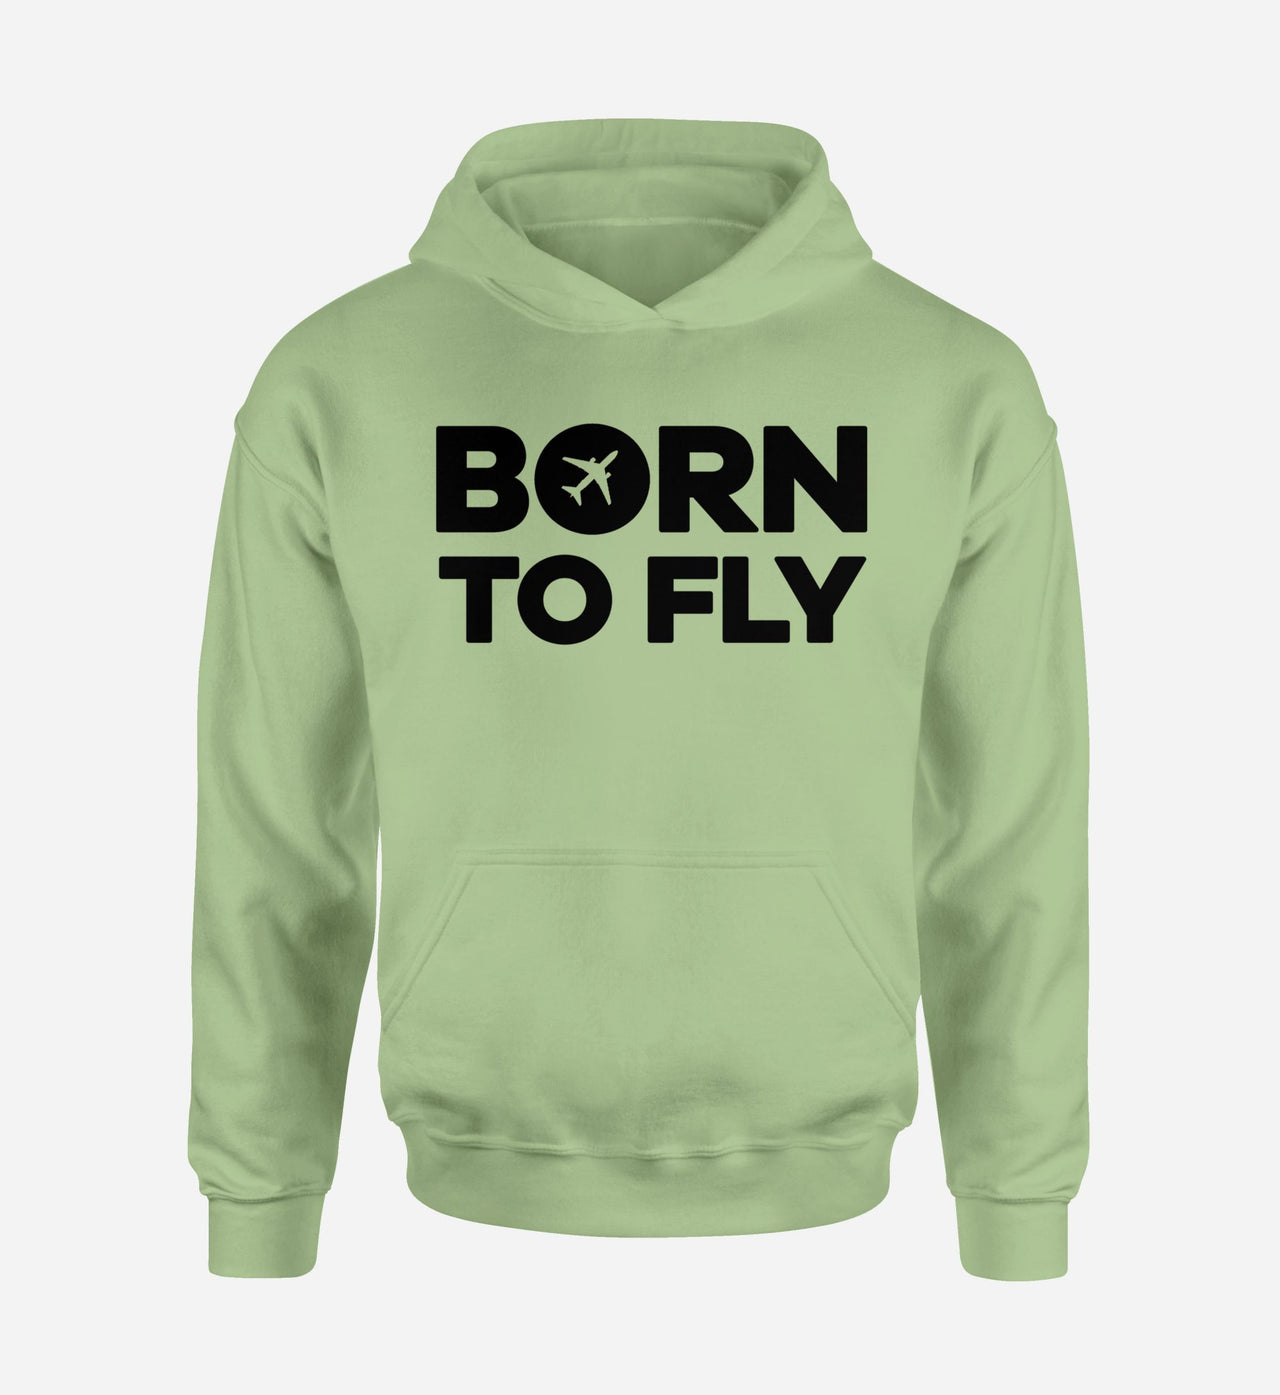 Born To Fly Special Designed Hoodies